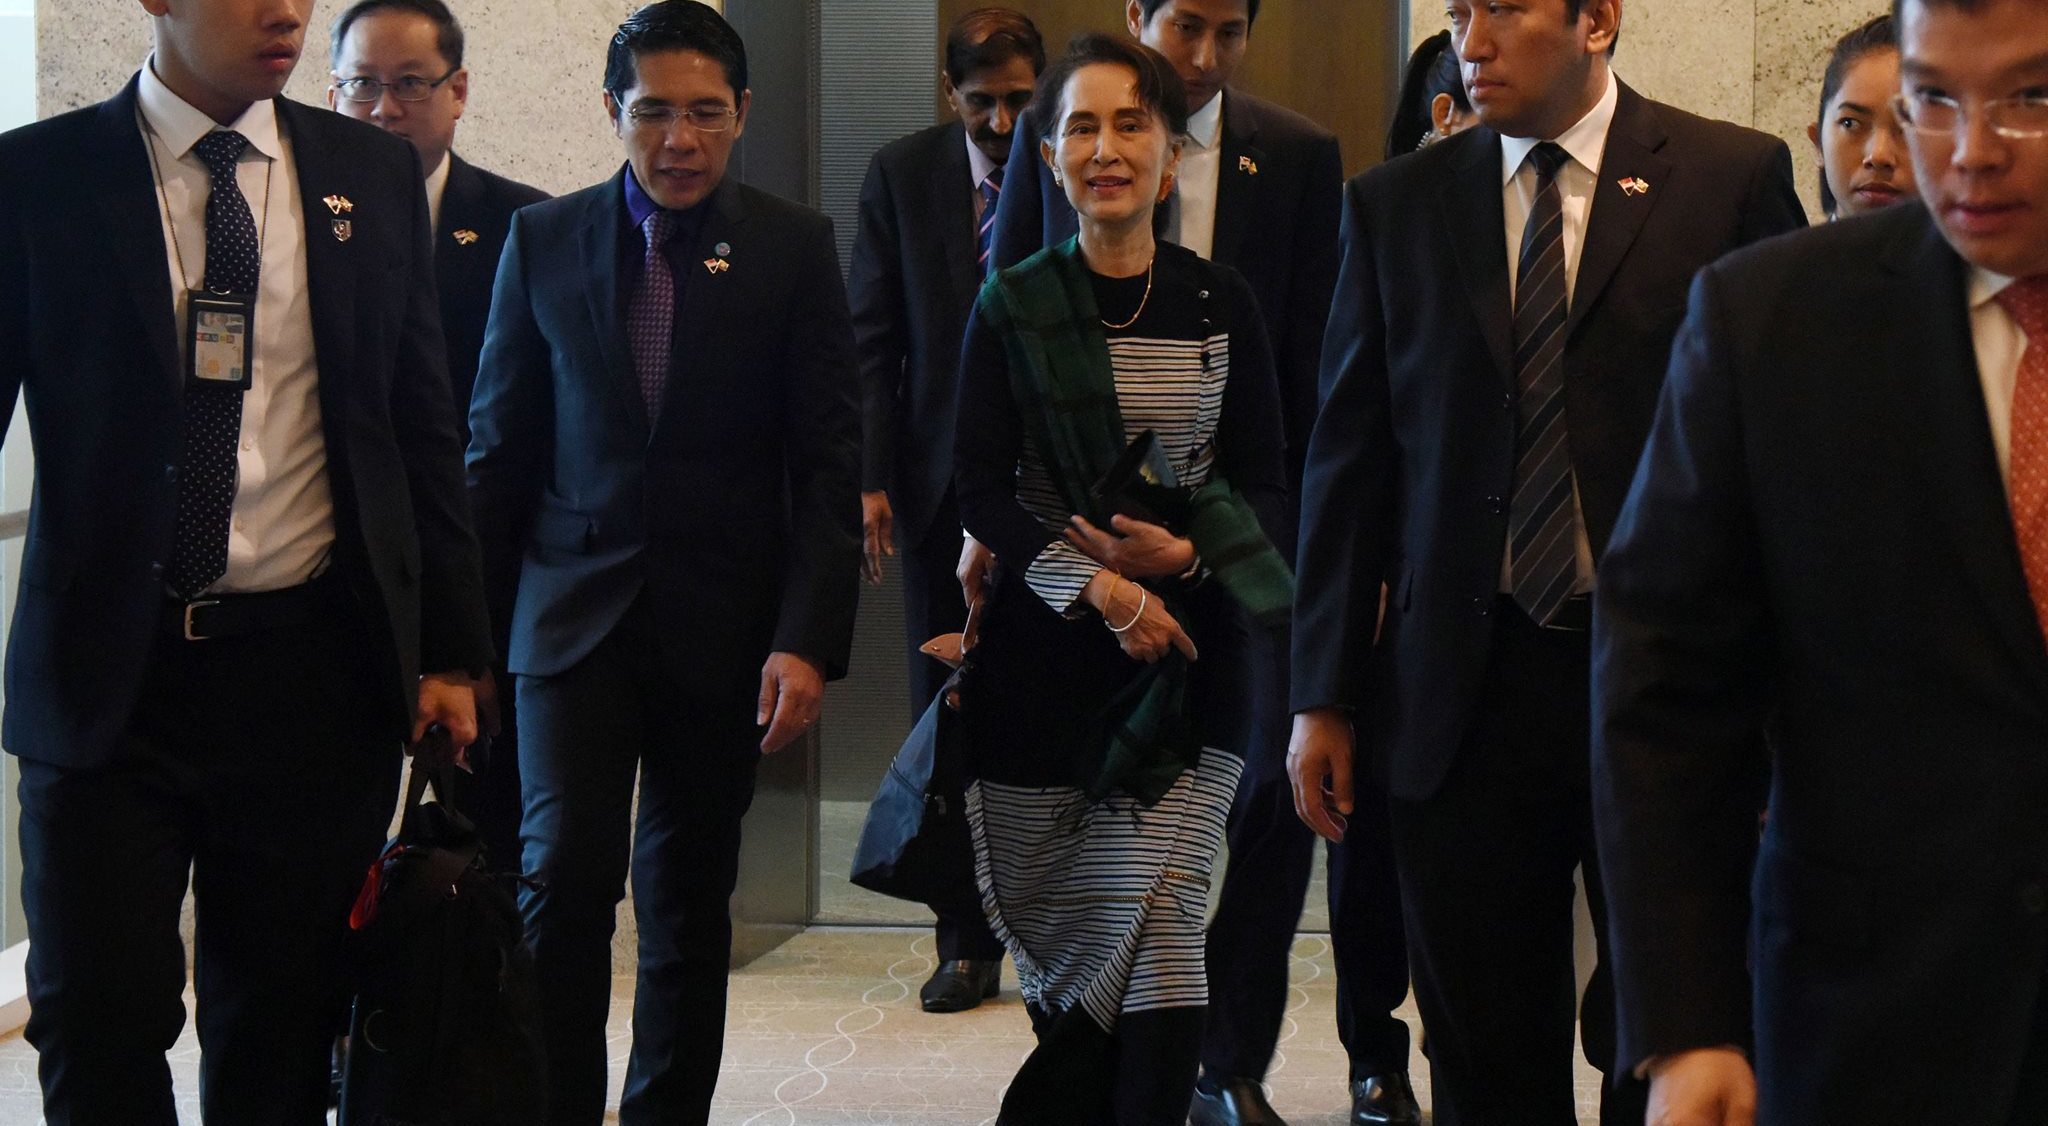 Aung San Suu Kyi arrives in Yangon after a visit to Singapore on Aug. 23, 2018. Photo: Office of the State Counsellor